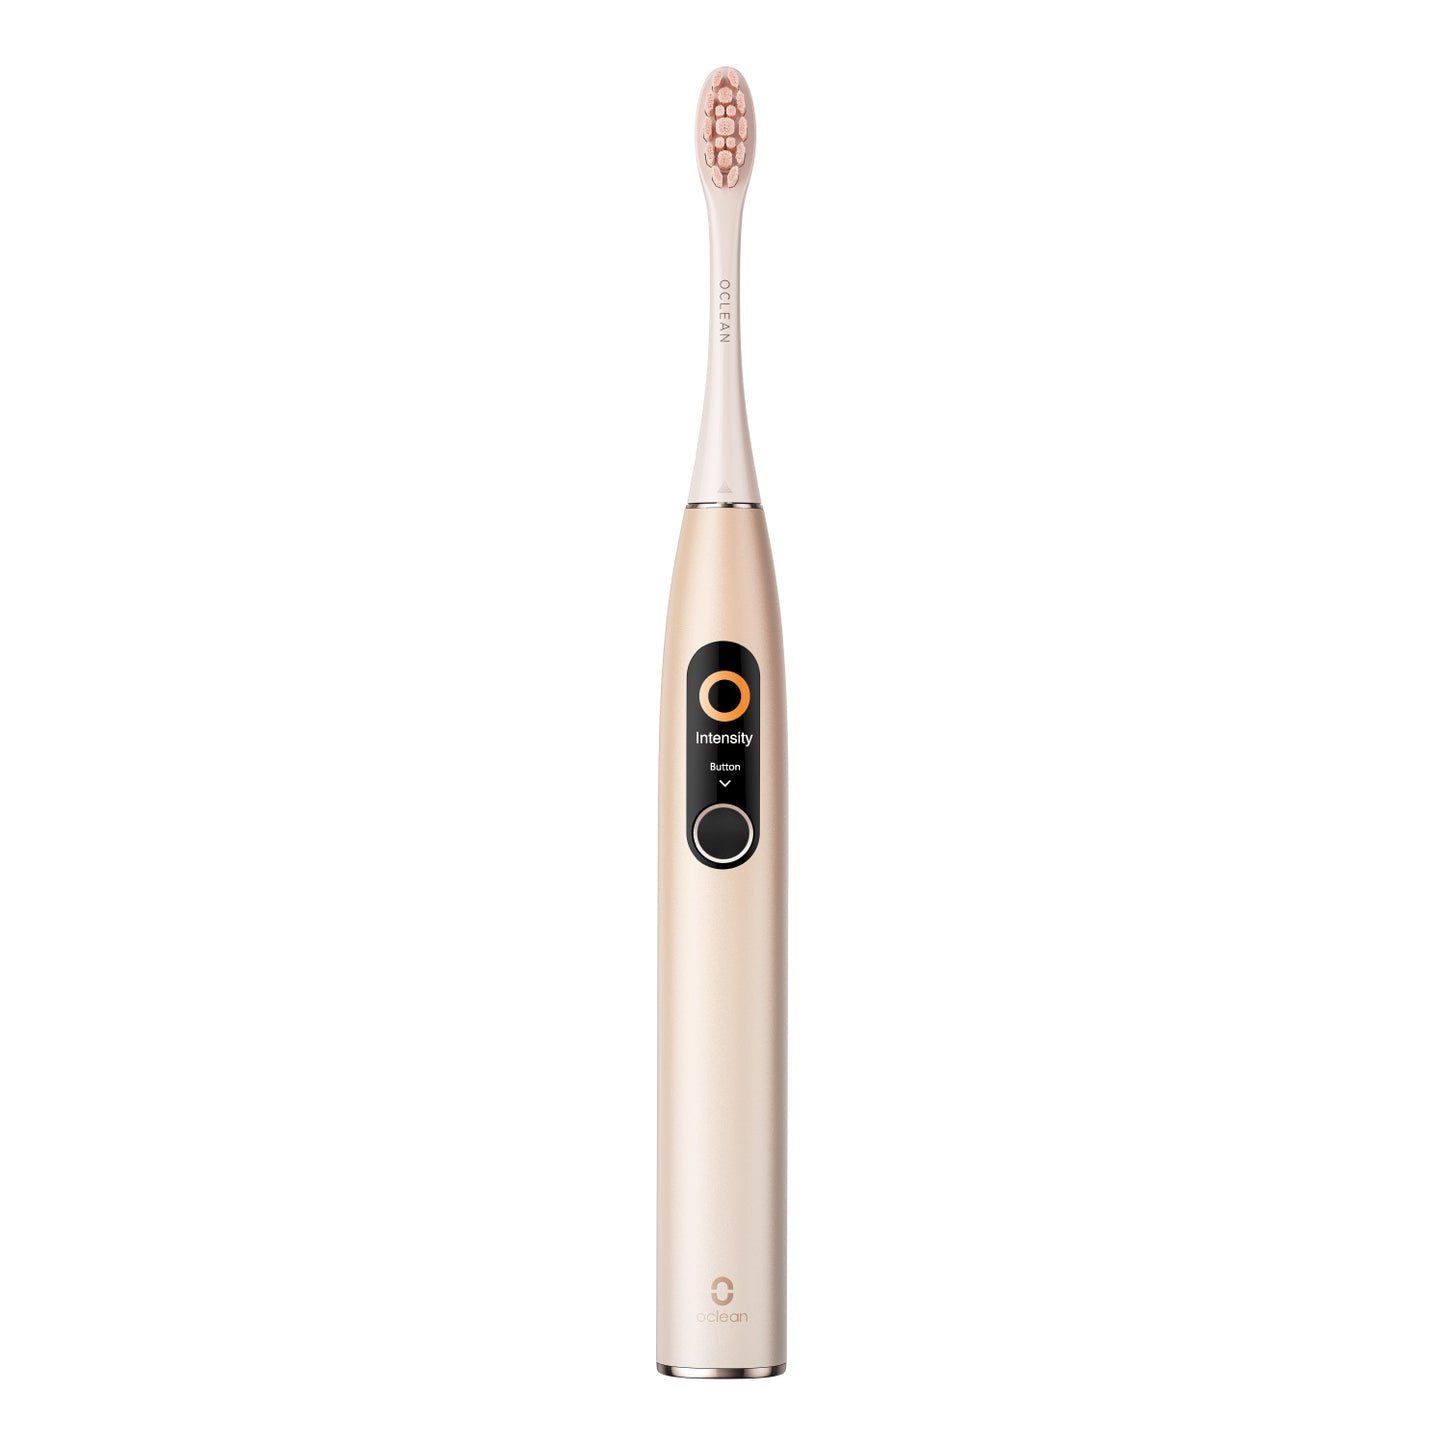 Oclean X Pro Smart Sonic Electric Toothbrush Toothbrushes Pink  Oclean Official